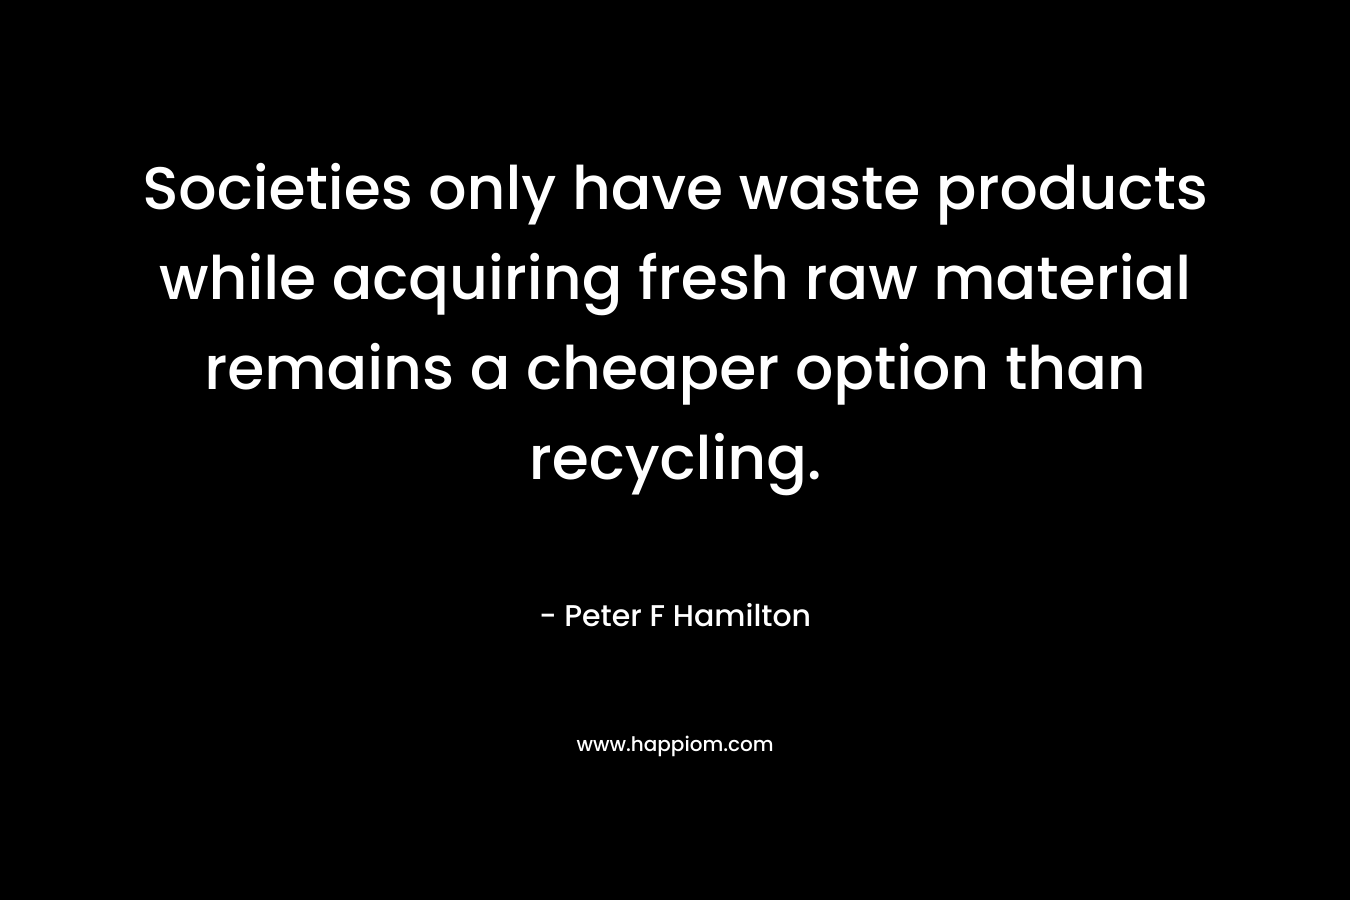 Societies only have waste products while acquiring fresh raw material remains a cheaper option than recycling. – Peter F Hamilton